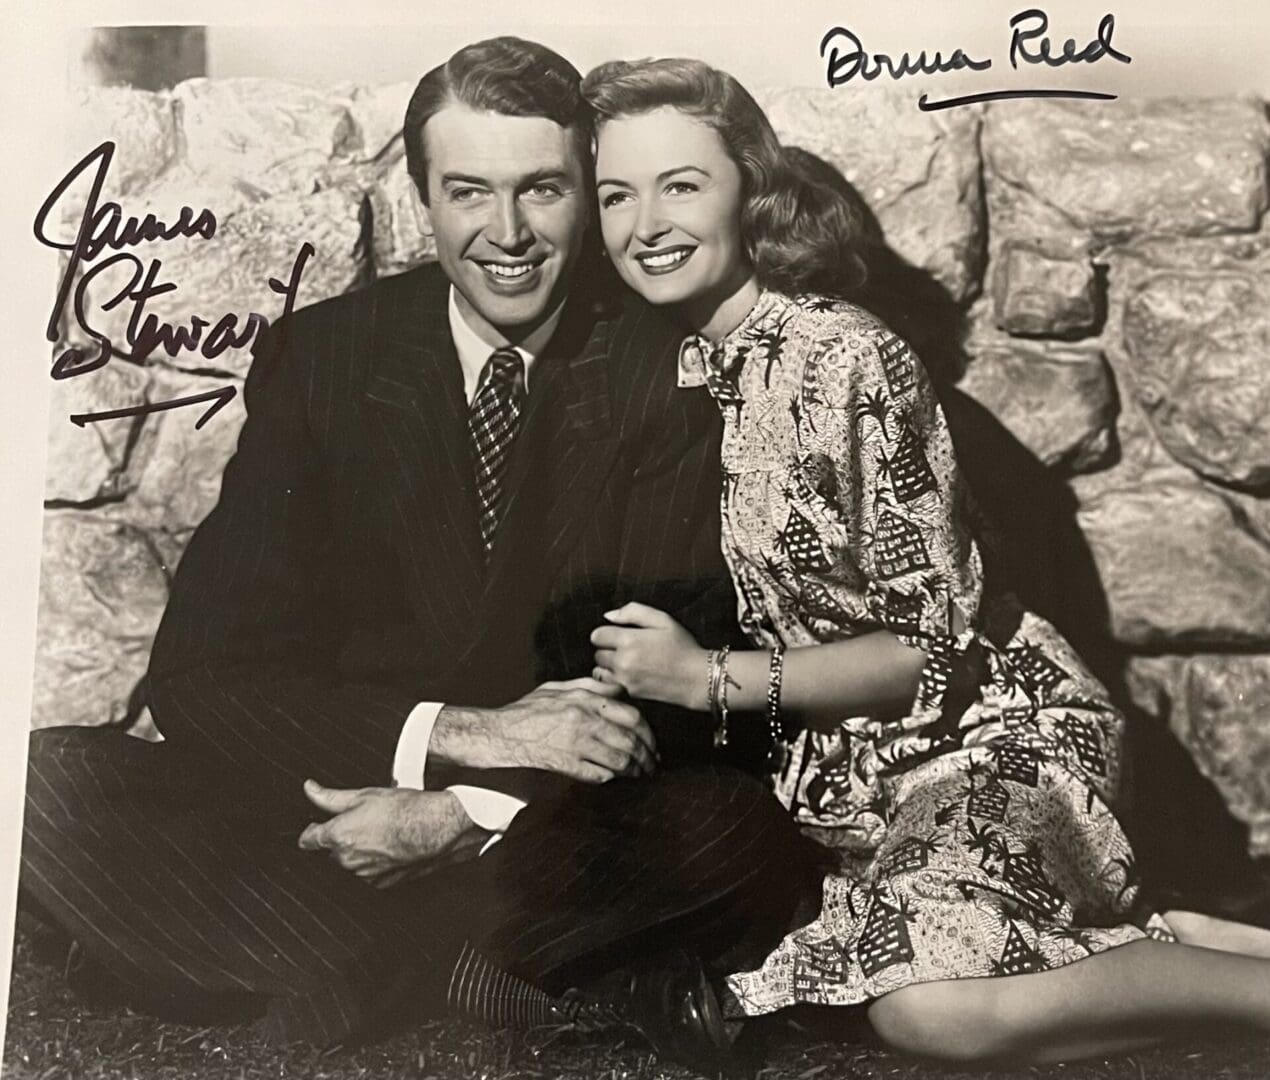 It is a Wonderful Life 10x8 Autographed Photo